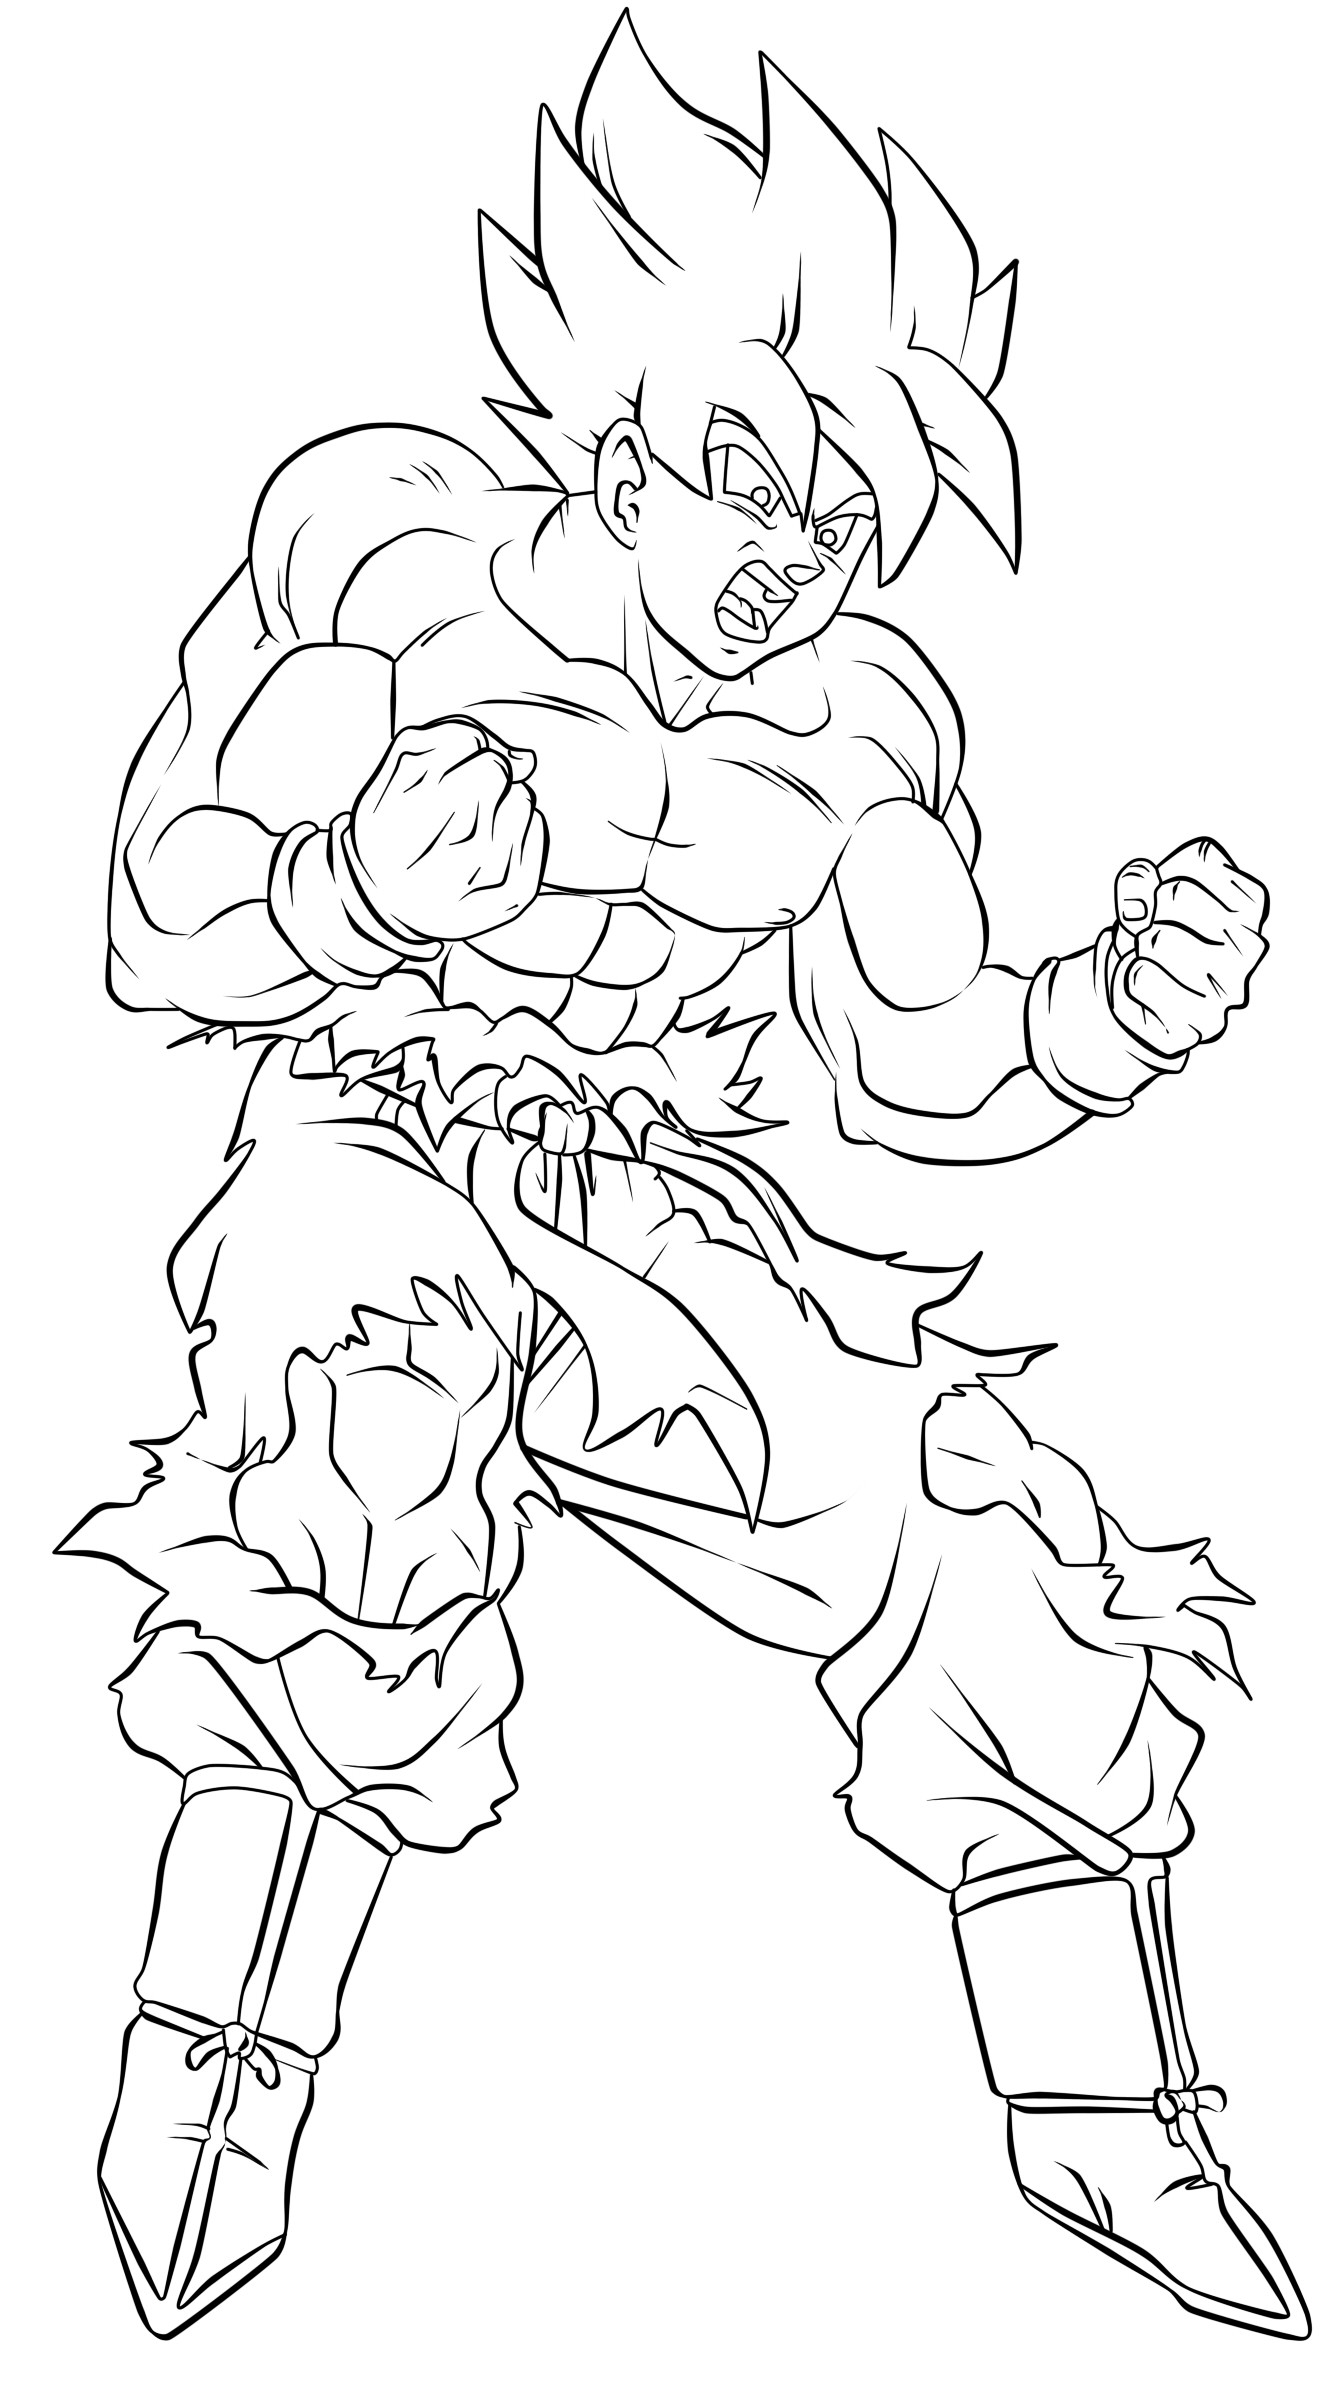 Super Saiyan Coloring Pages At Getcolorings | Free à Coloriage Dragon Ball Z Goku